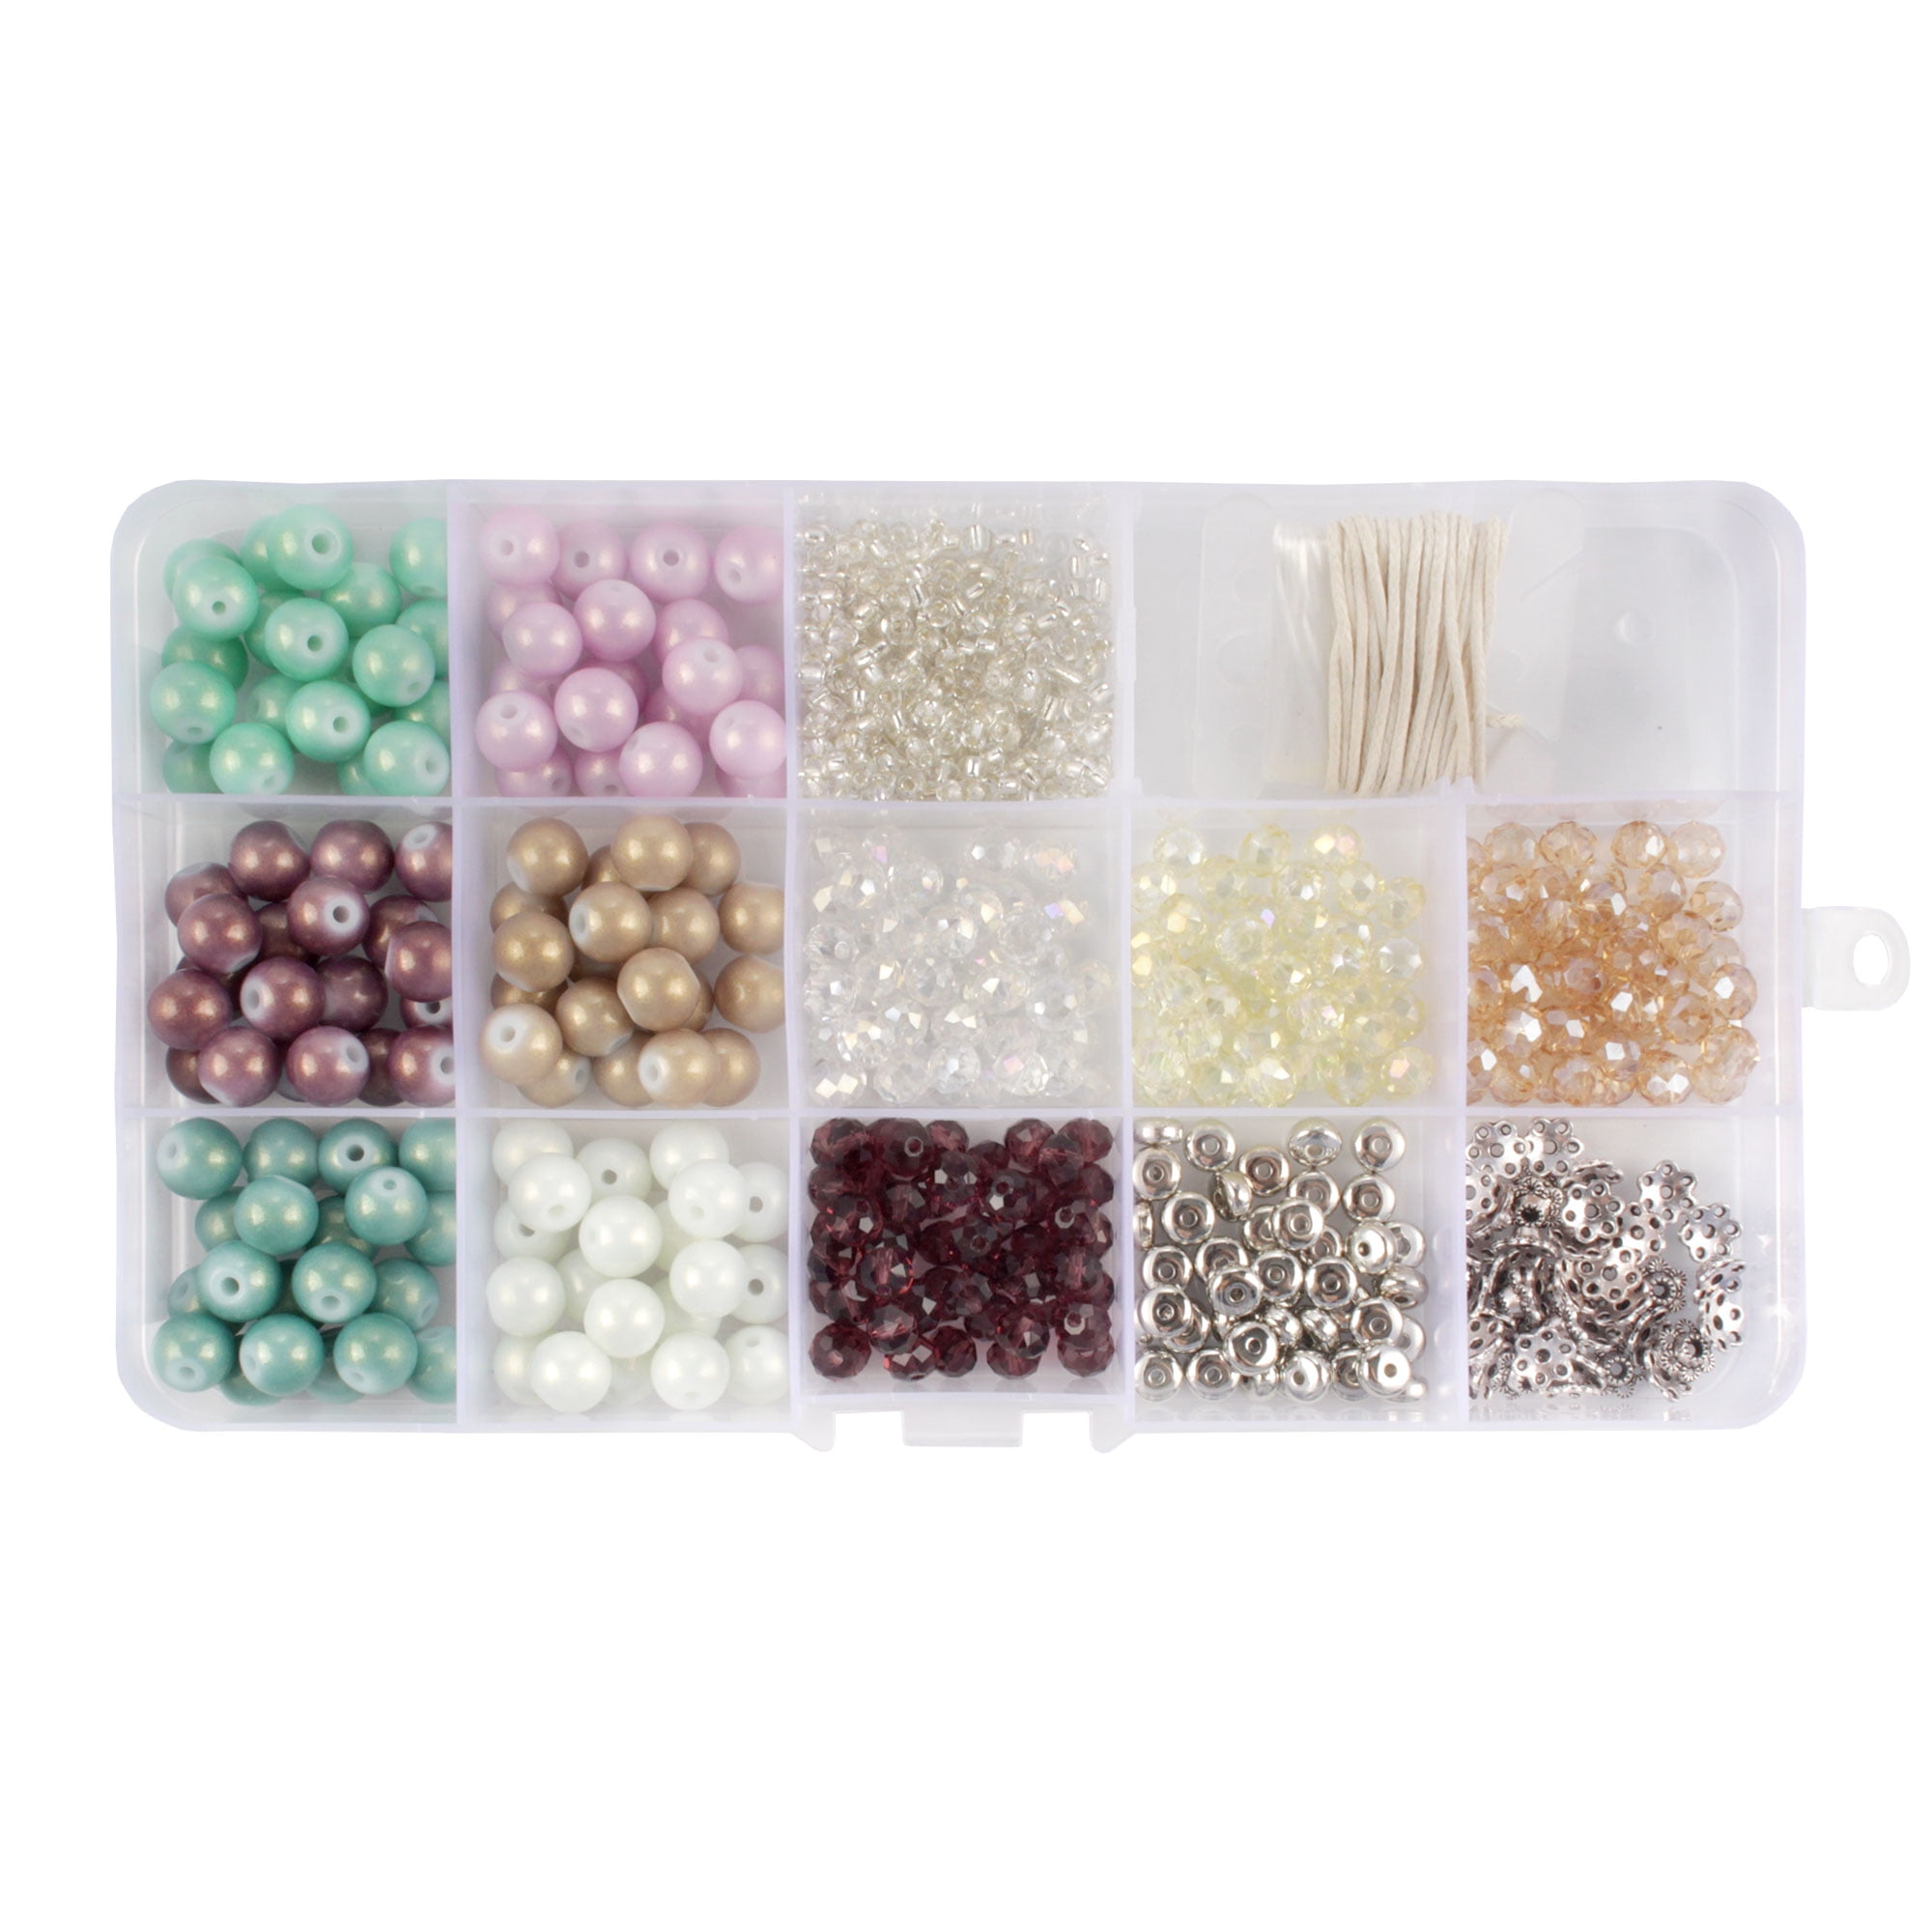 Assorted Bead Kits - DIY Bracelet and Necklace Craft Set - Round Glass Beads  and Alloy Accessories with 3.5m of Wax & Elastic Thread - Assortment 213 